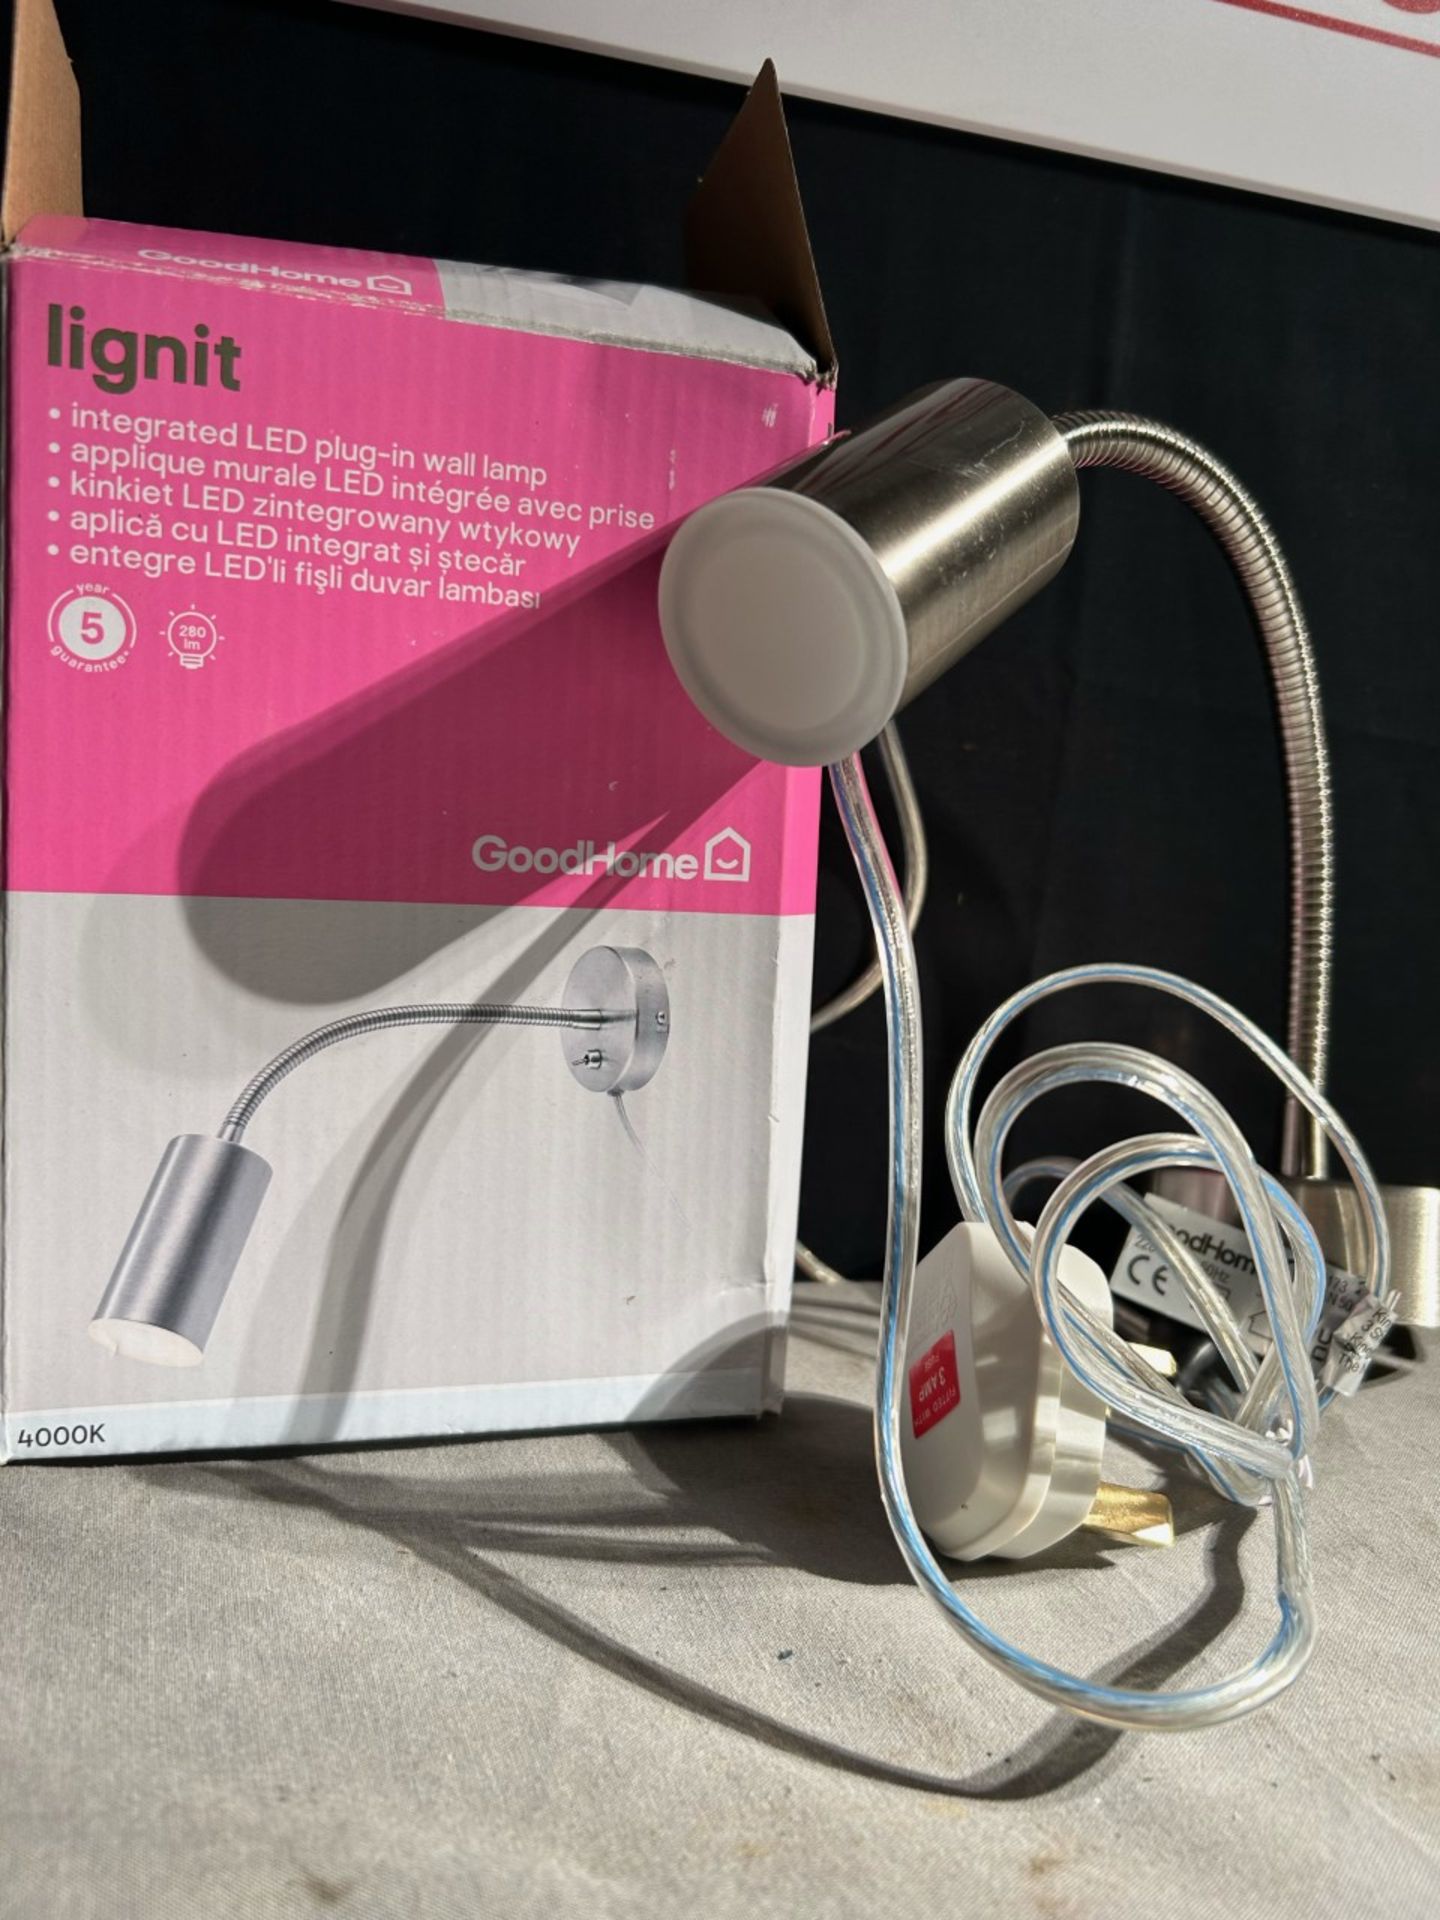 Intergrated plug in LED Flexible wall lamp. New in box - Bild 3 aus 3